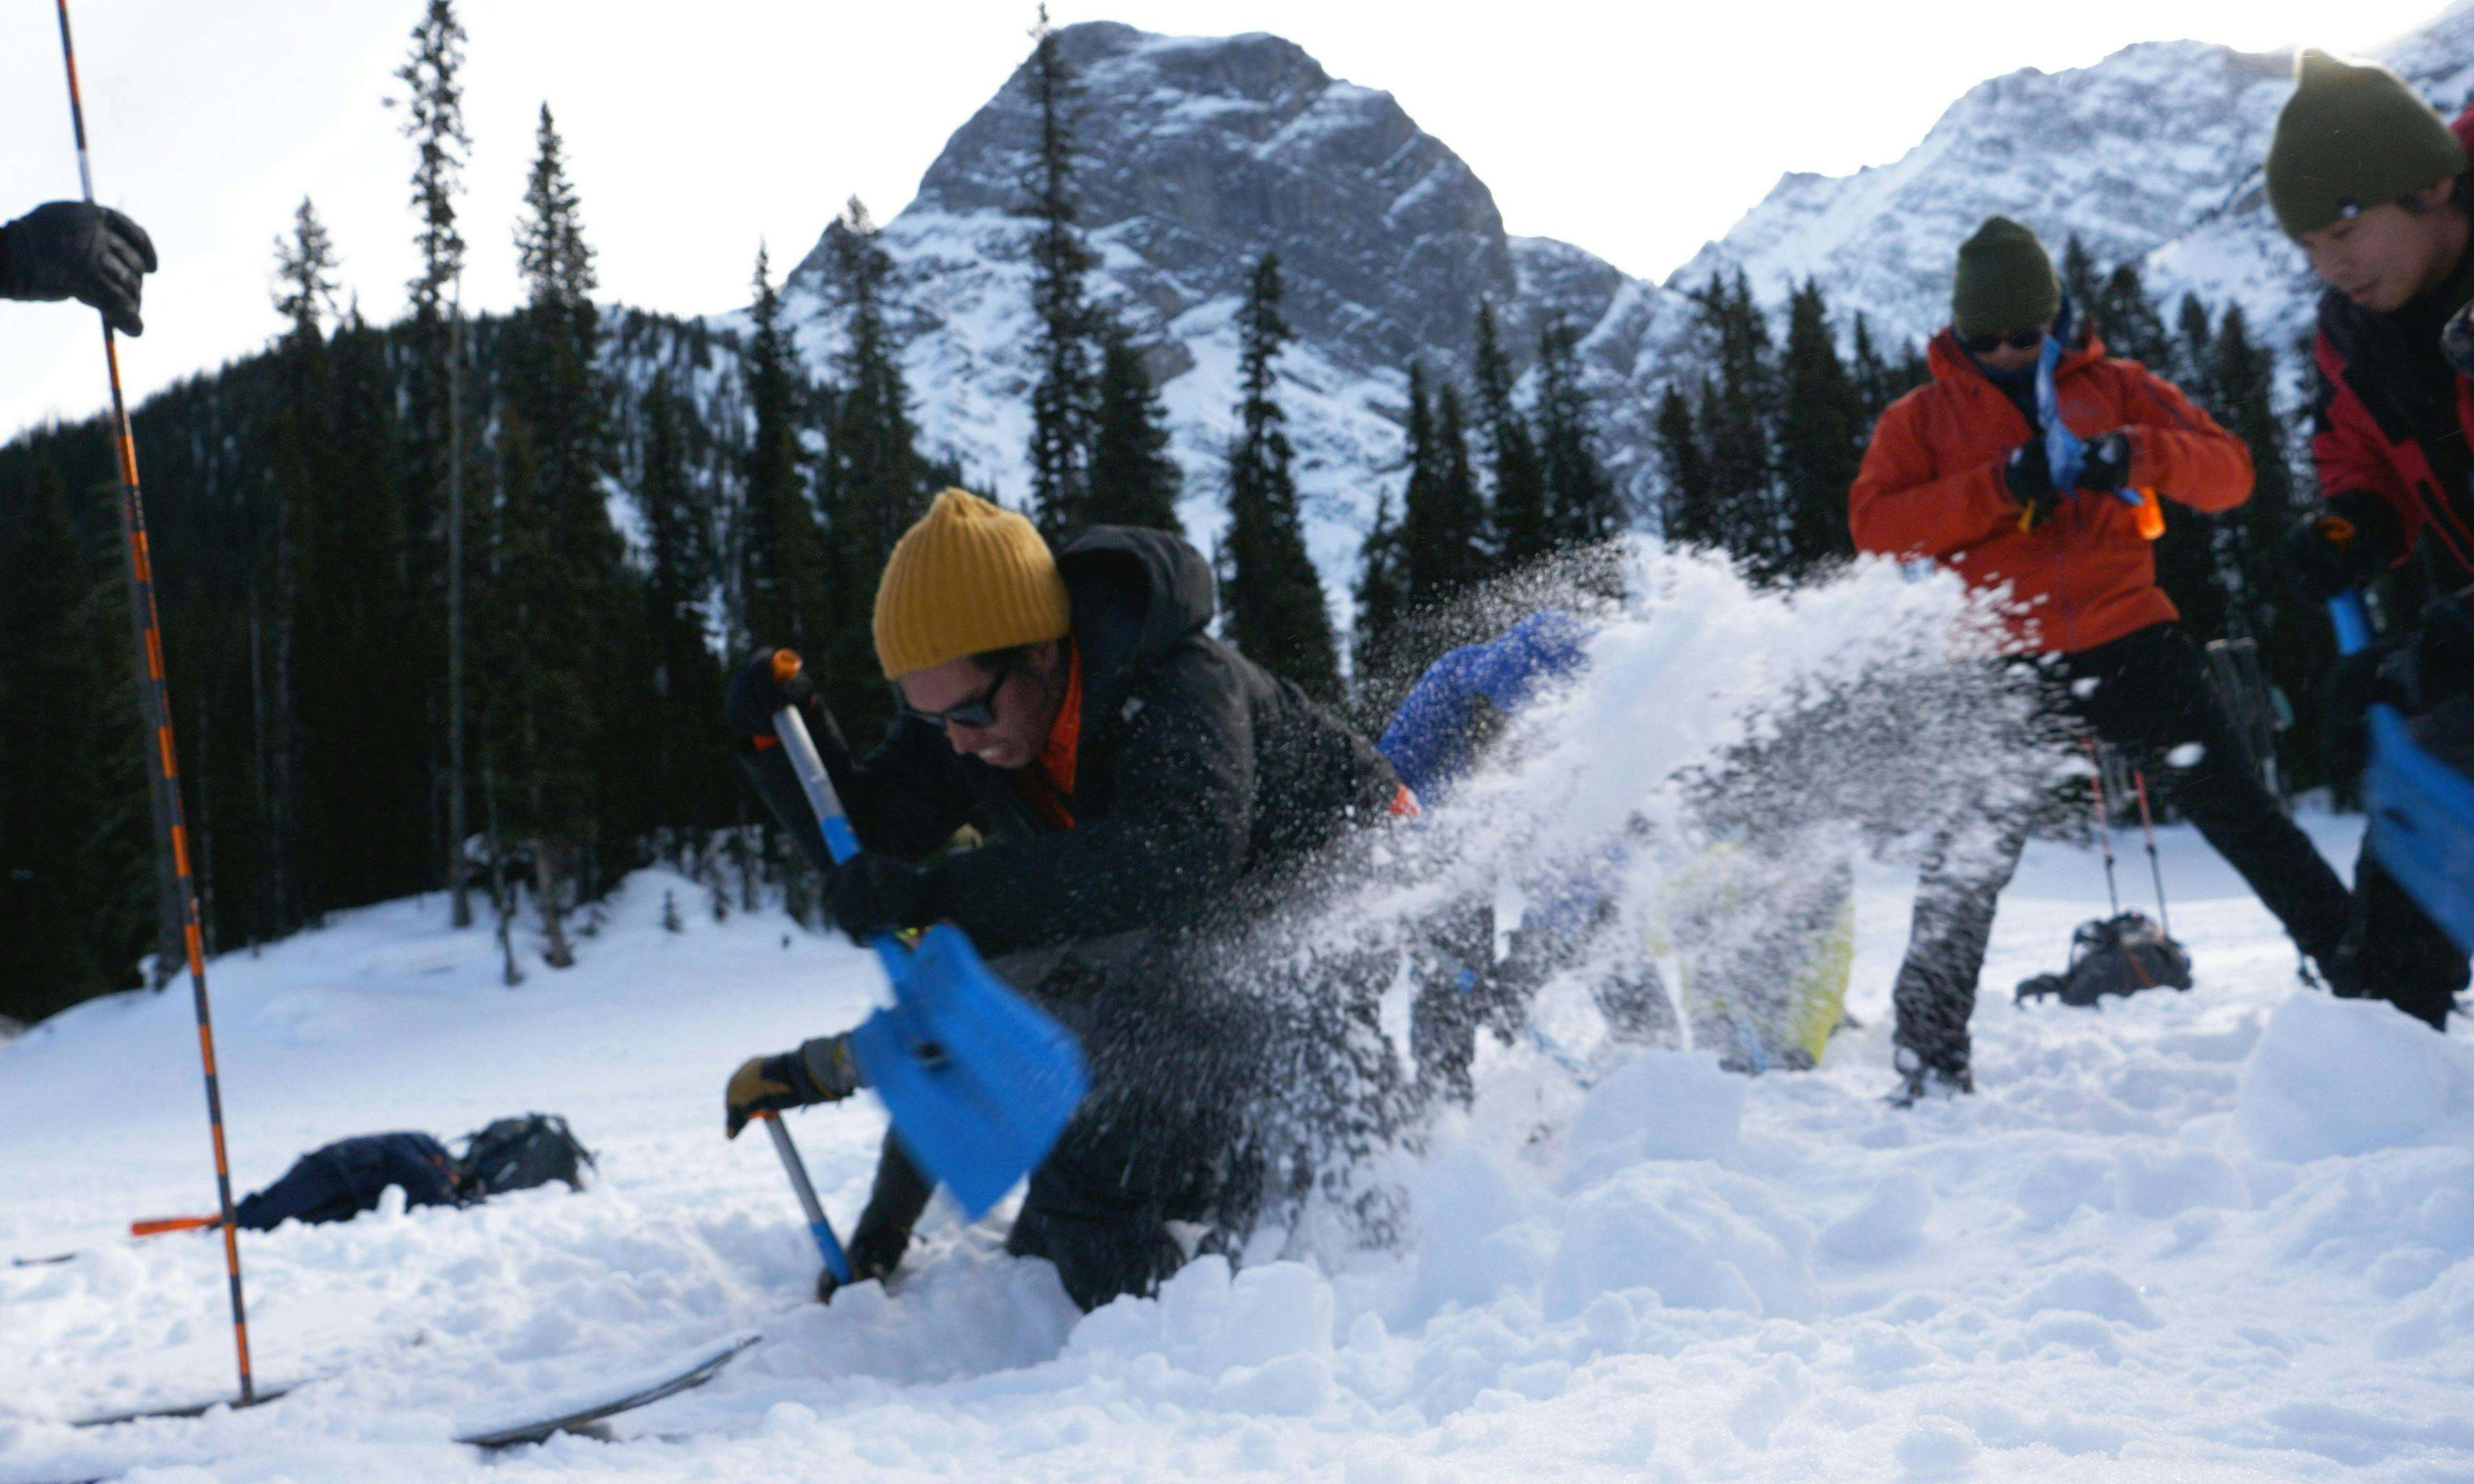 Avalanche training course with students working on shoveling technique